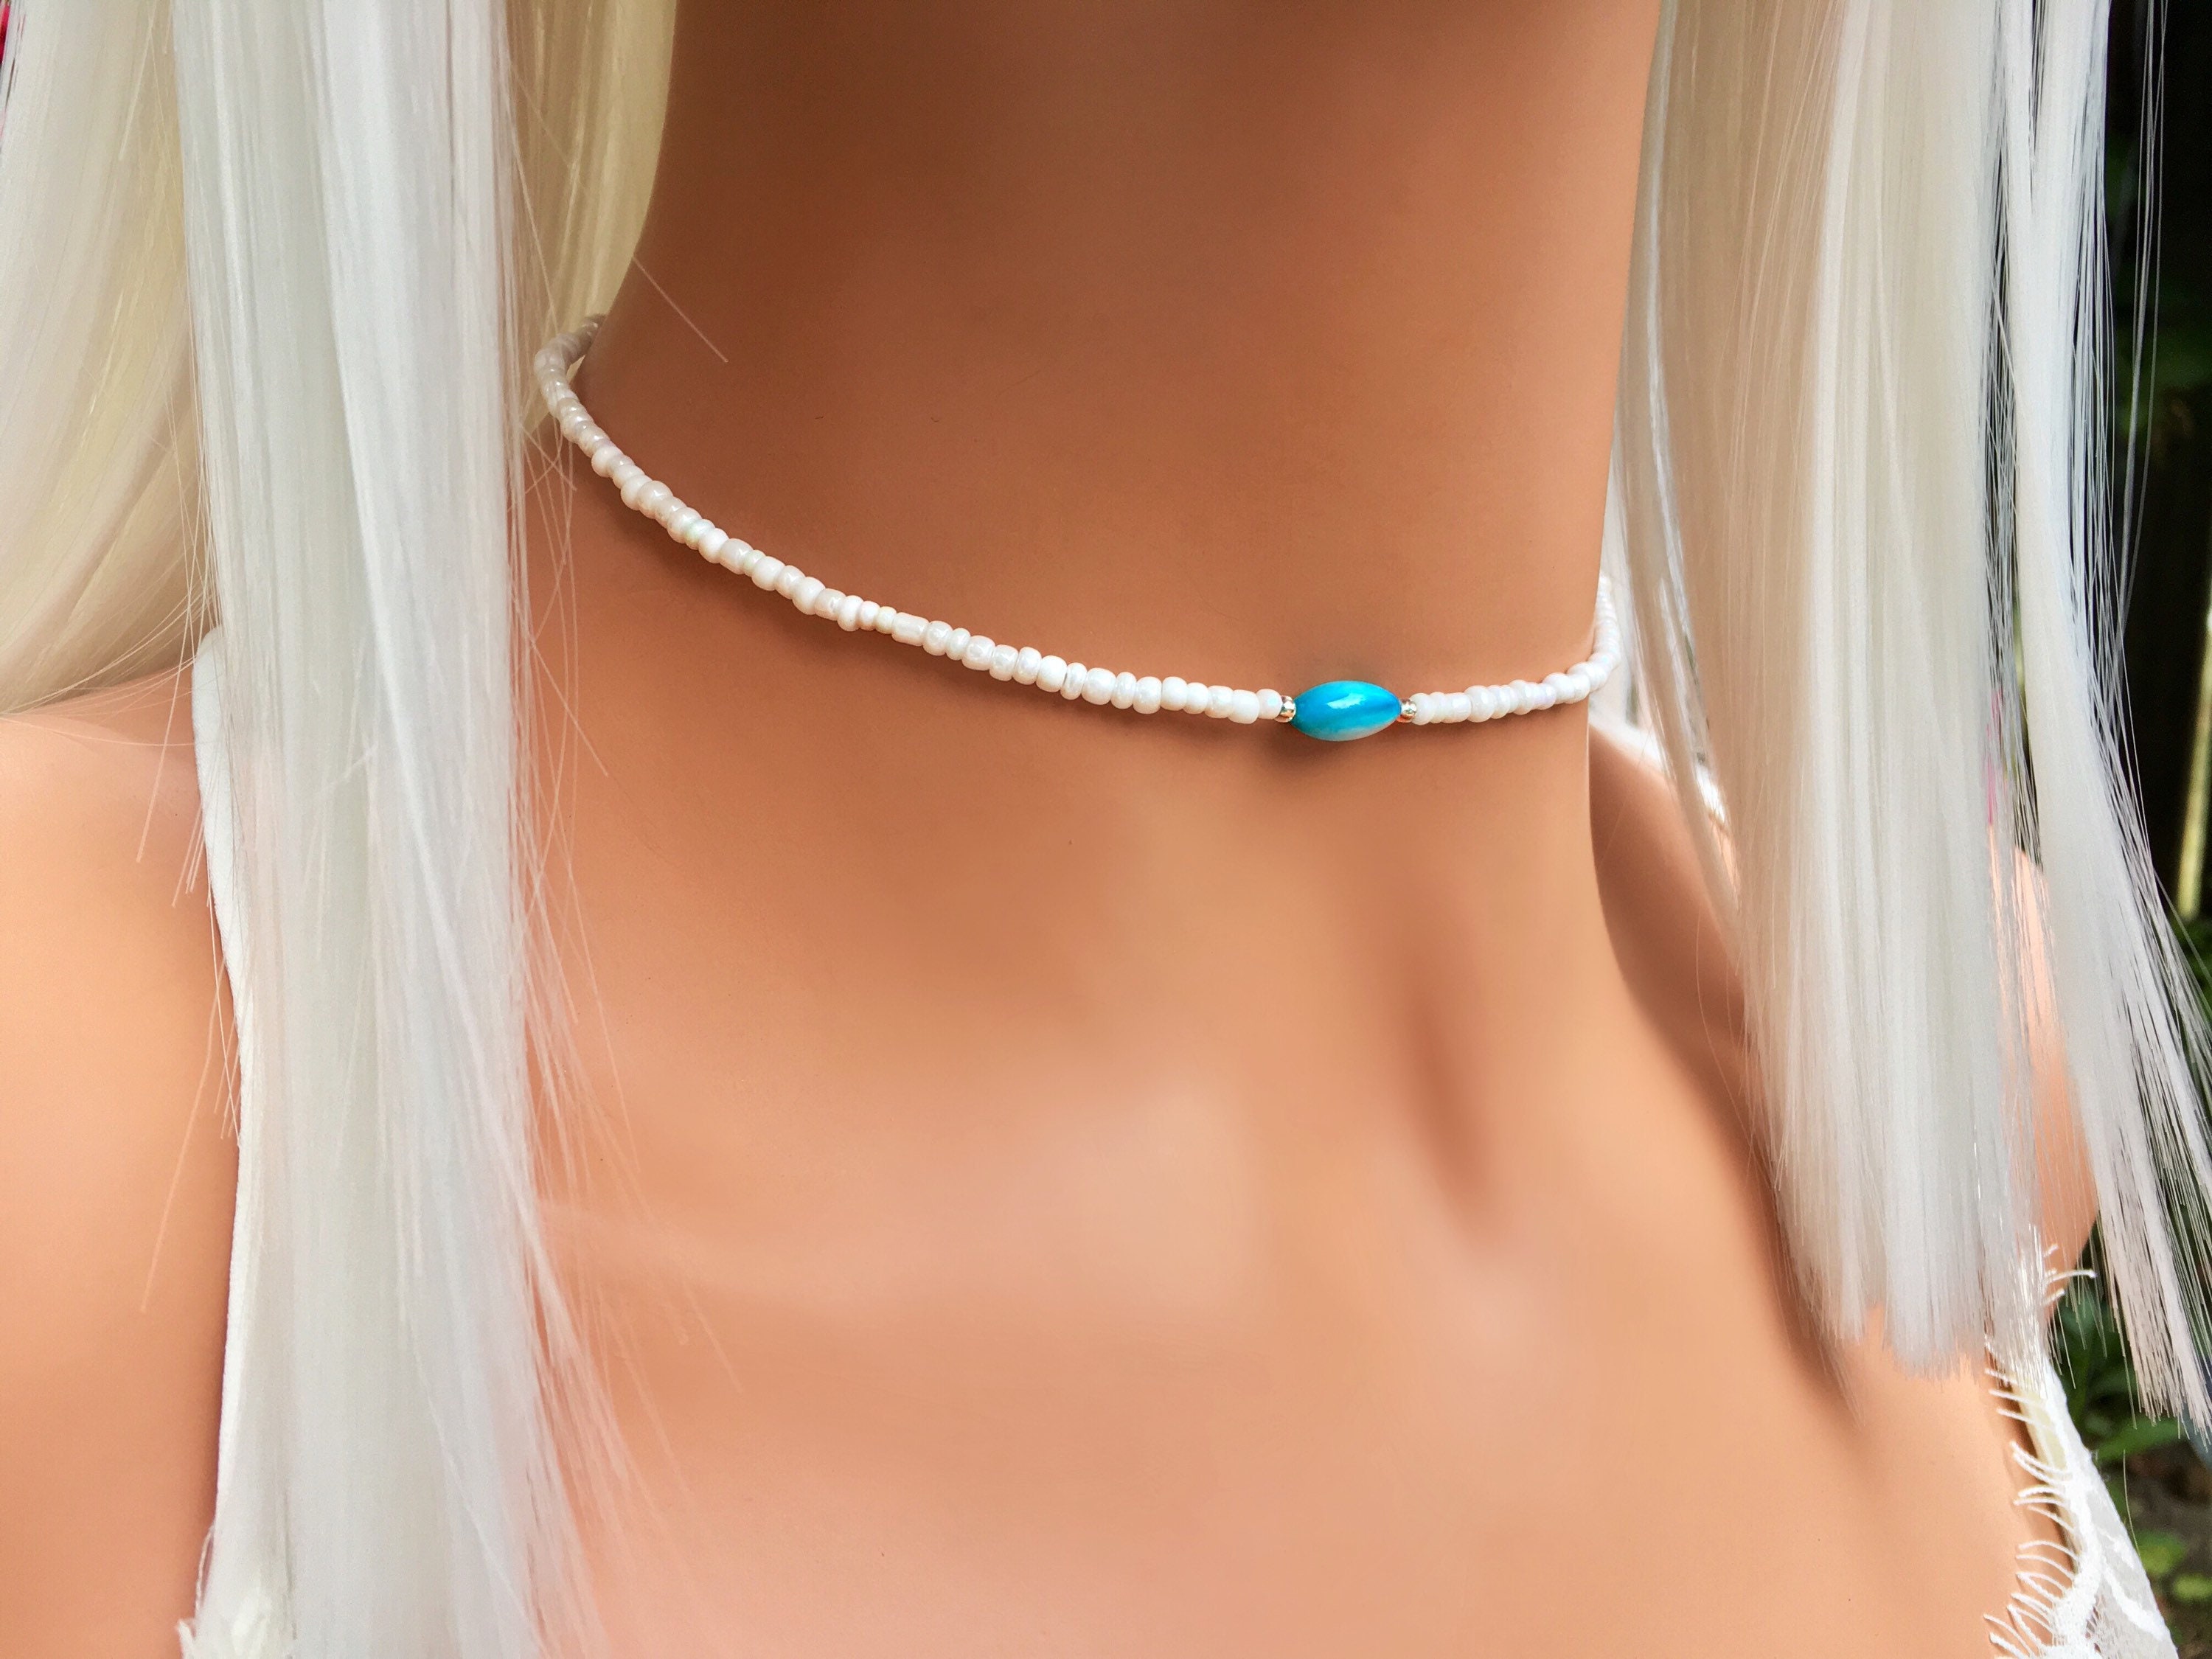 KESYOO choker necklaces for woman womens necklace choker necklace for women  beach choker necklaces for women sea star necklaces beach necklace Mermaid